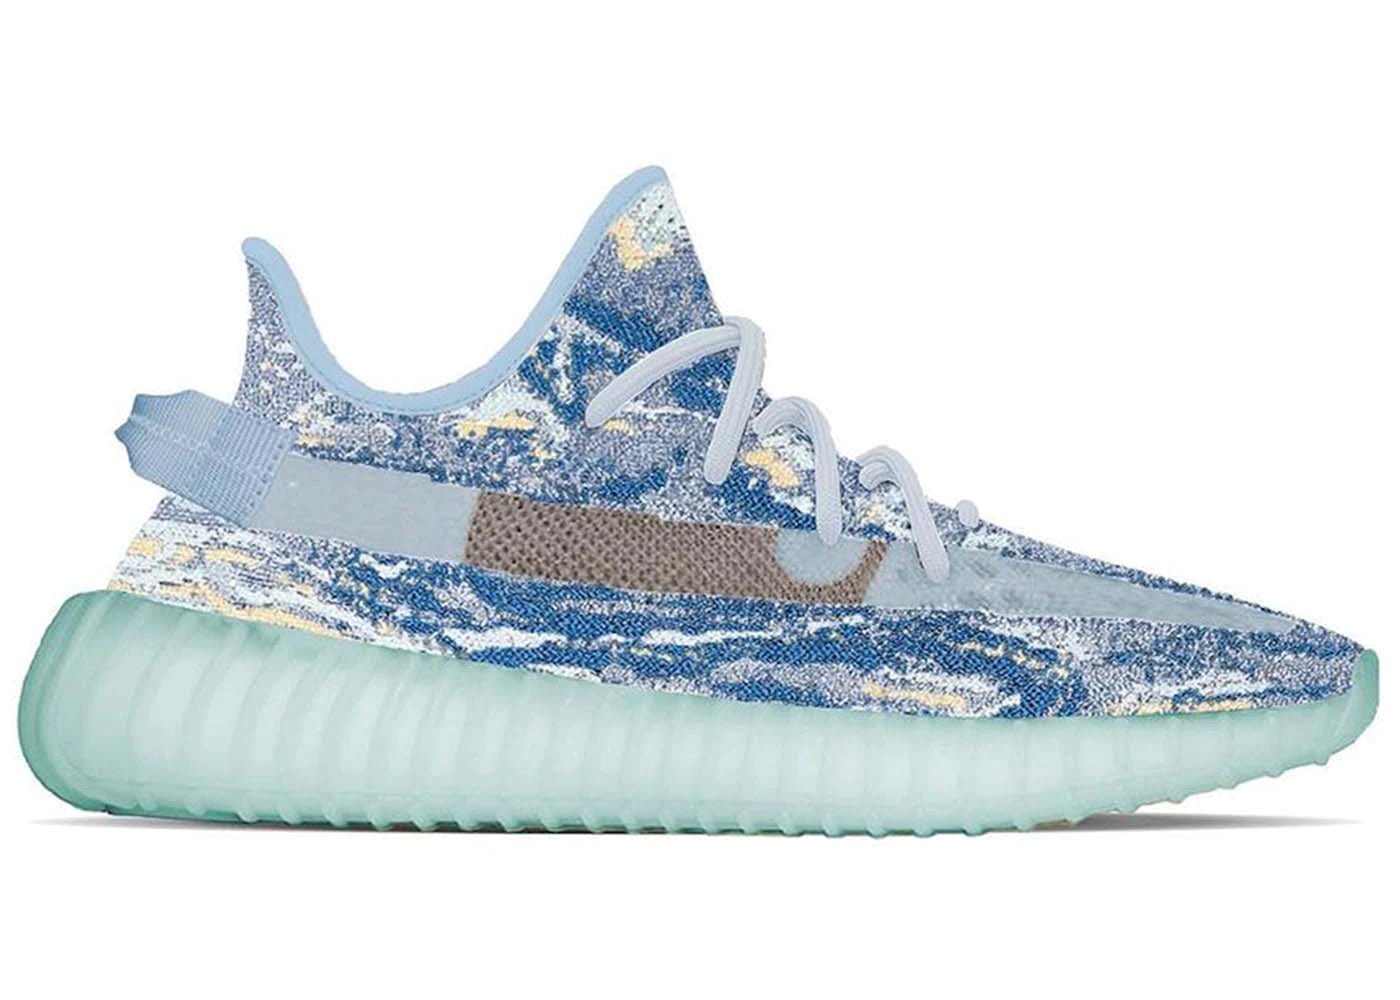 Yeezy Boost 350 V2 MX Frost Blue - Supra Sneakers